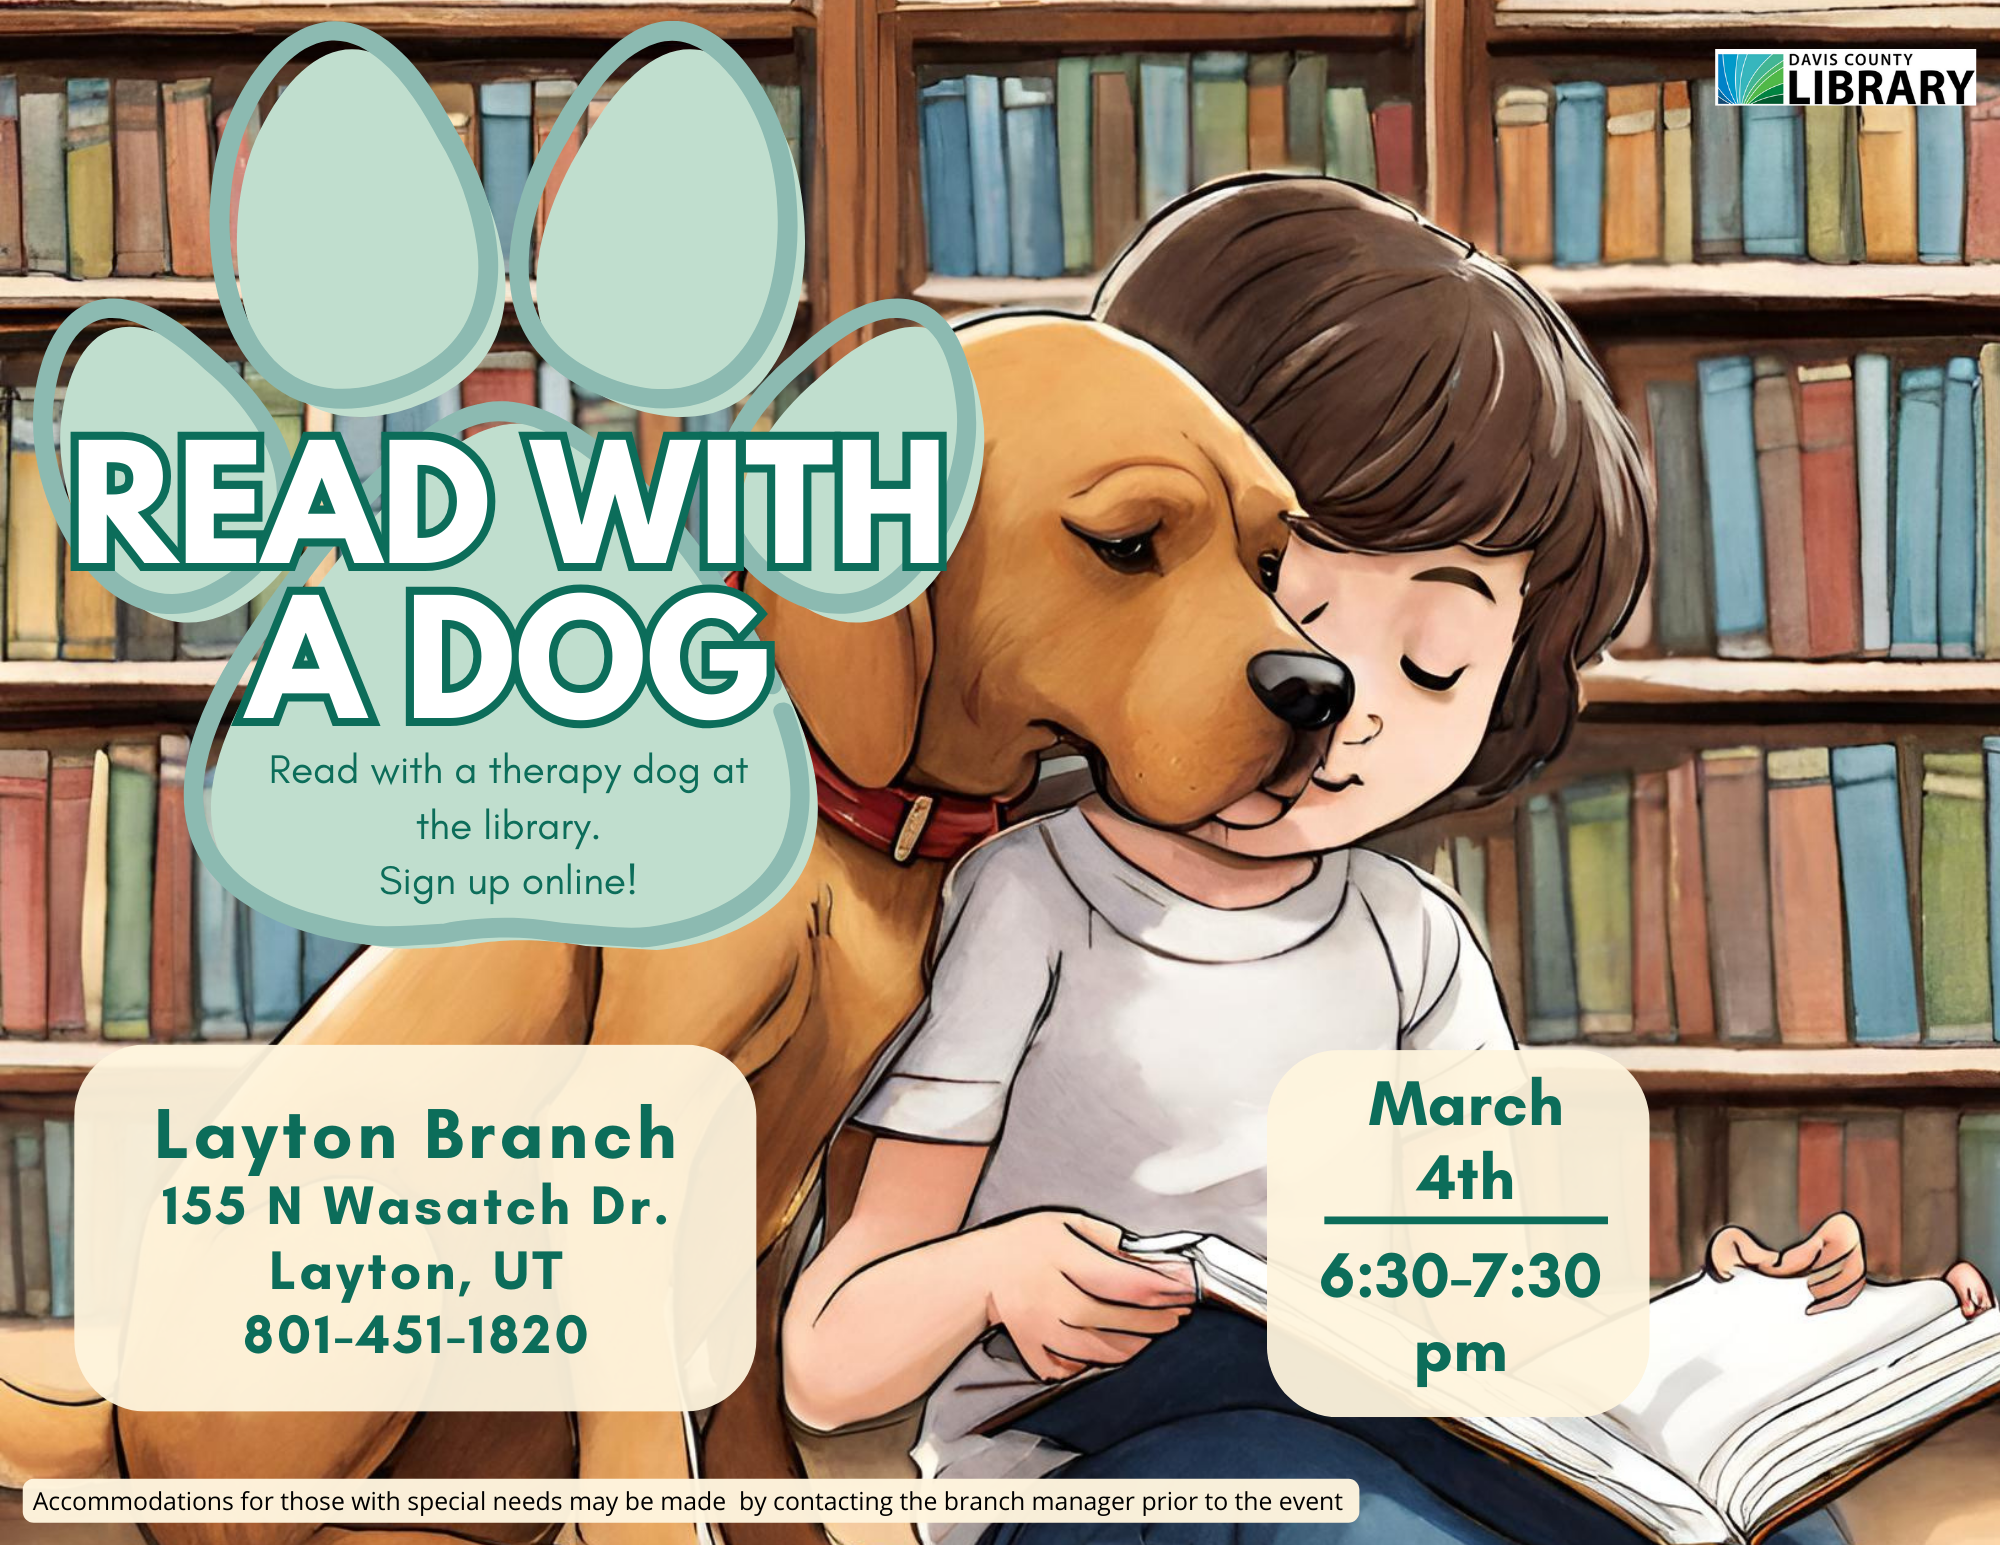 Read with a dog - March 4 6:30-7:30 pm. Layton Branch.